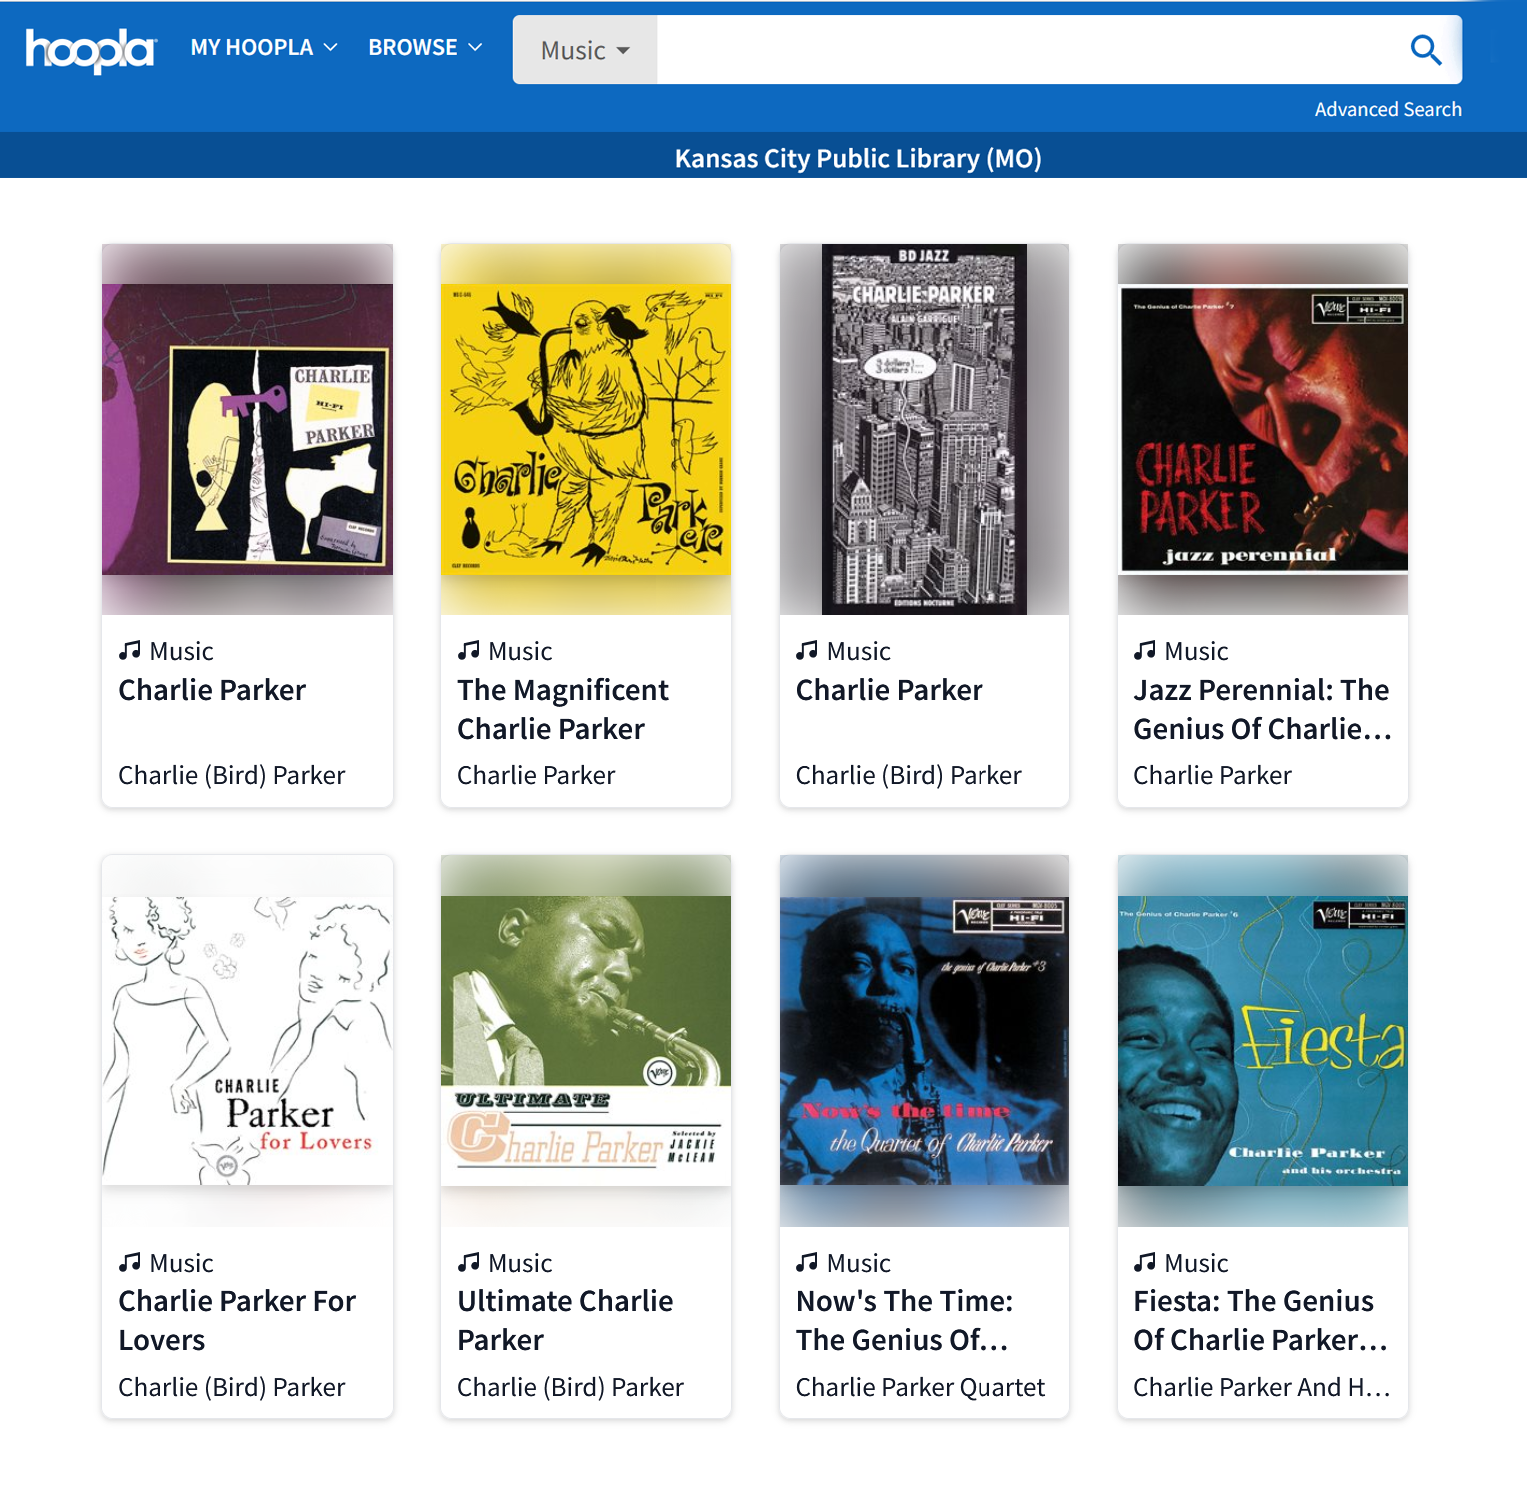 screenshot of eight music items by Charlie Parker